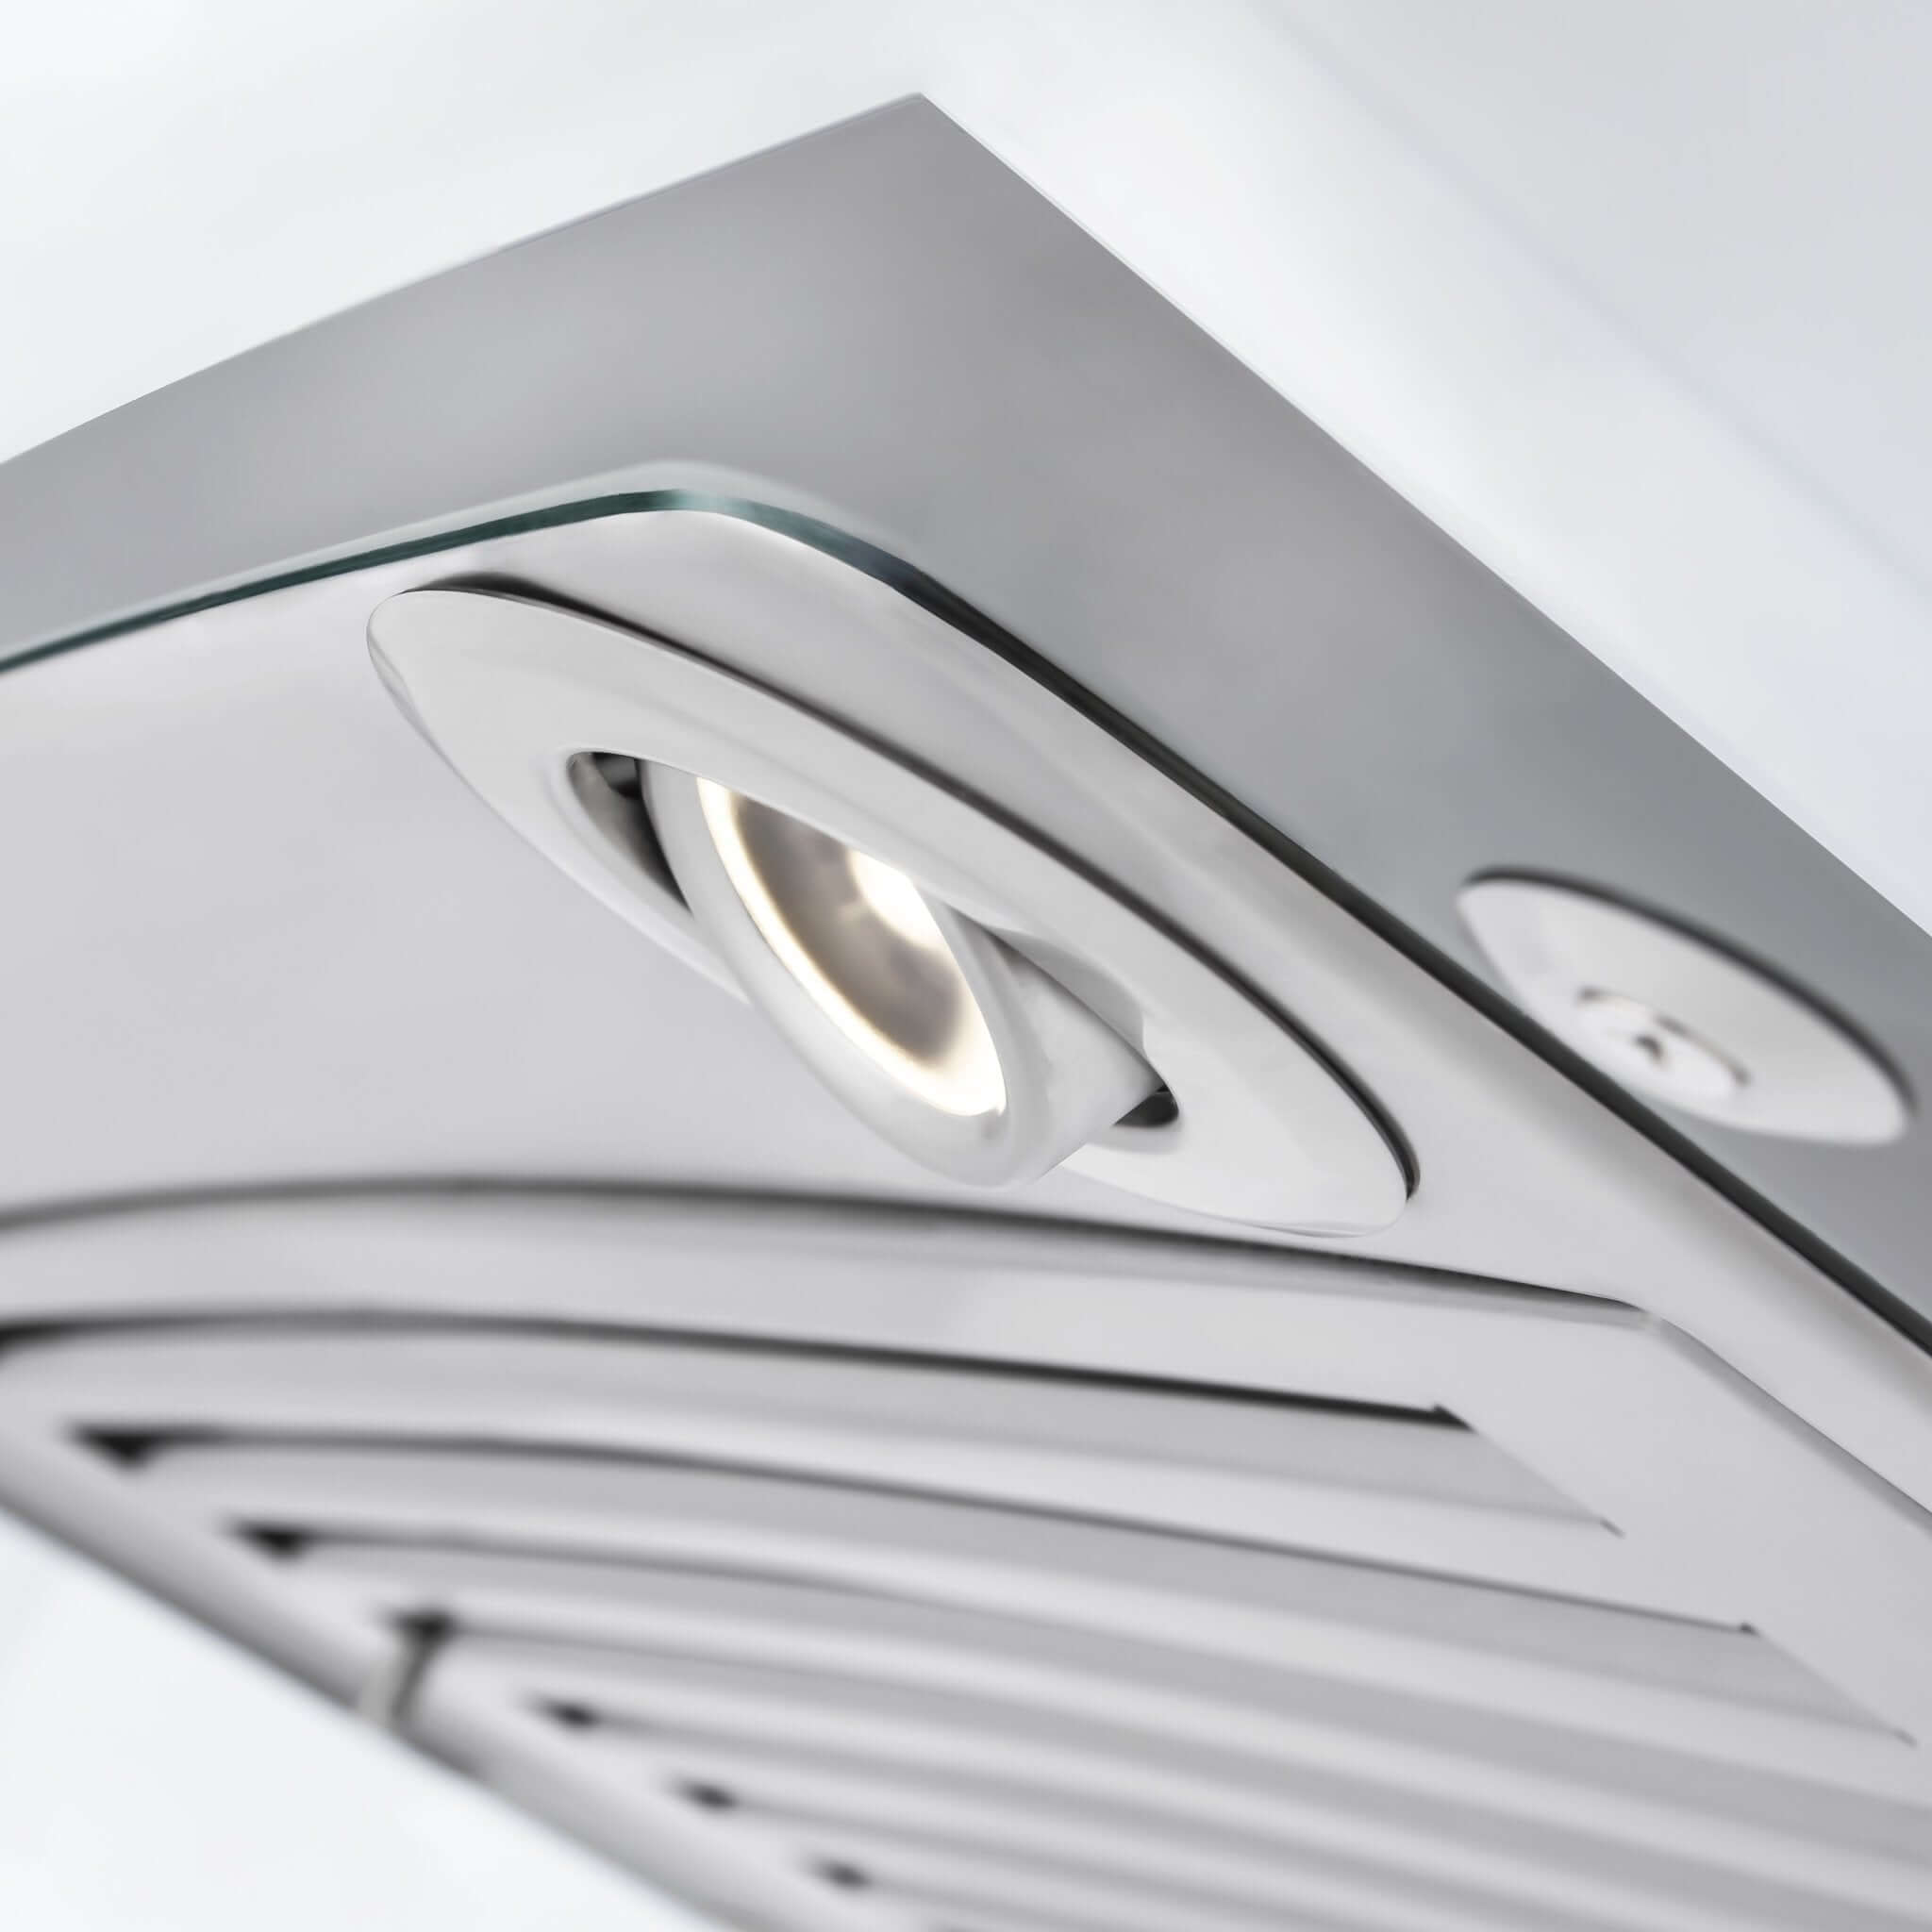 Built-in direction LED lighting on ZLINE Convertible Vent Wall Mount Range Hood in Stainless Steel & Glass (KN).